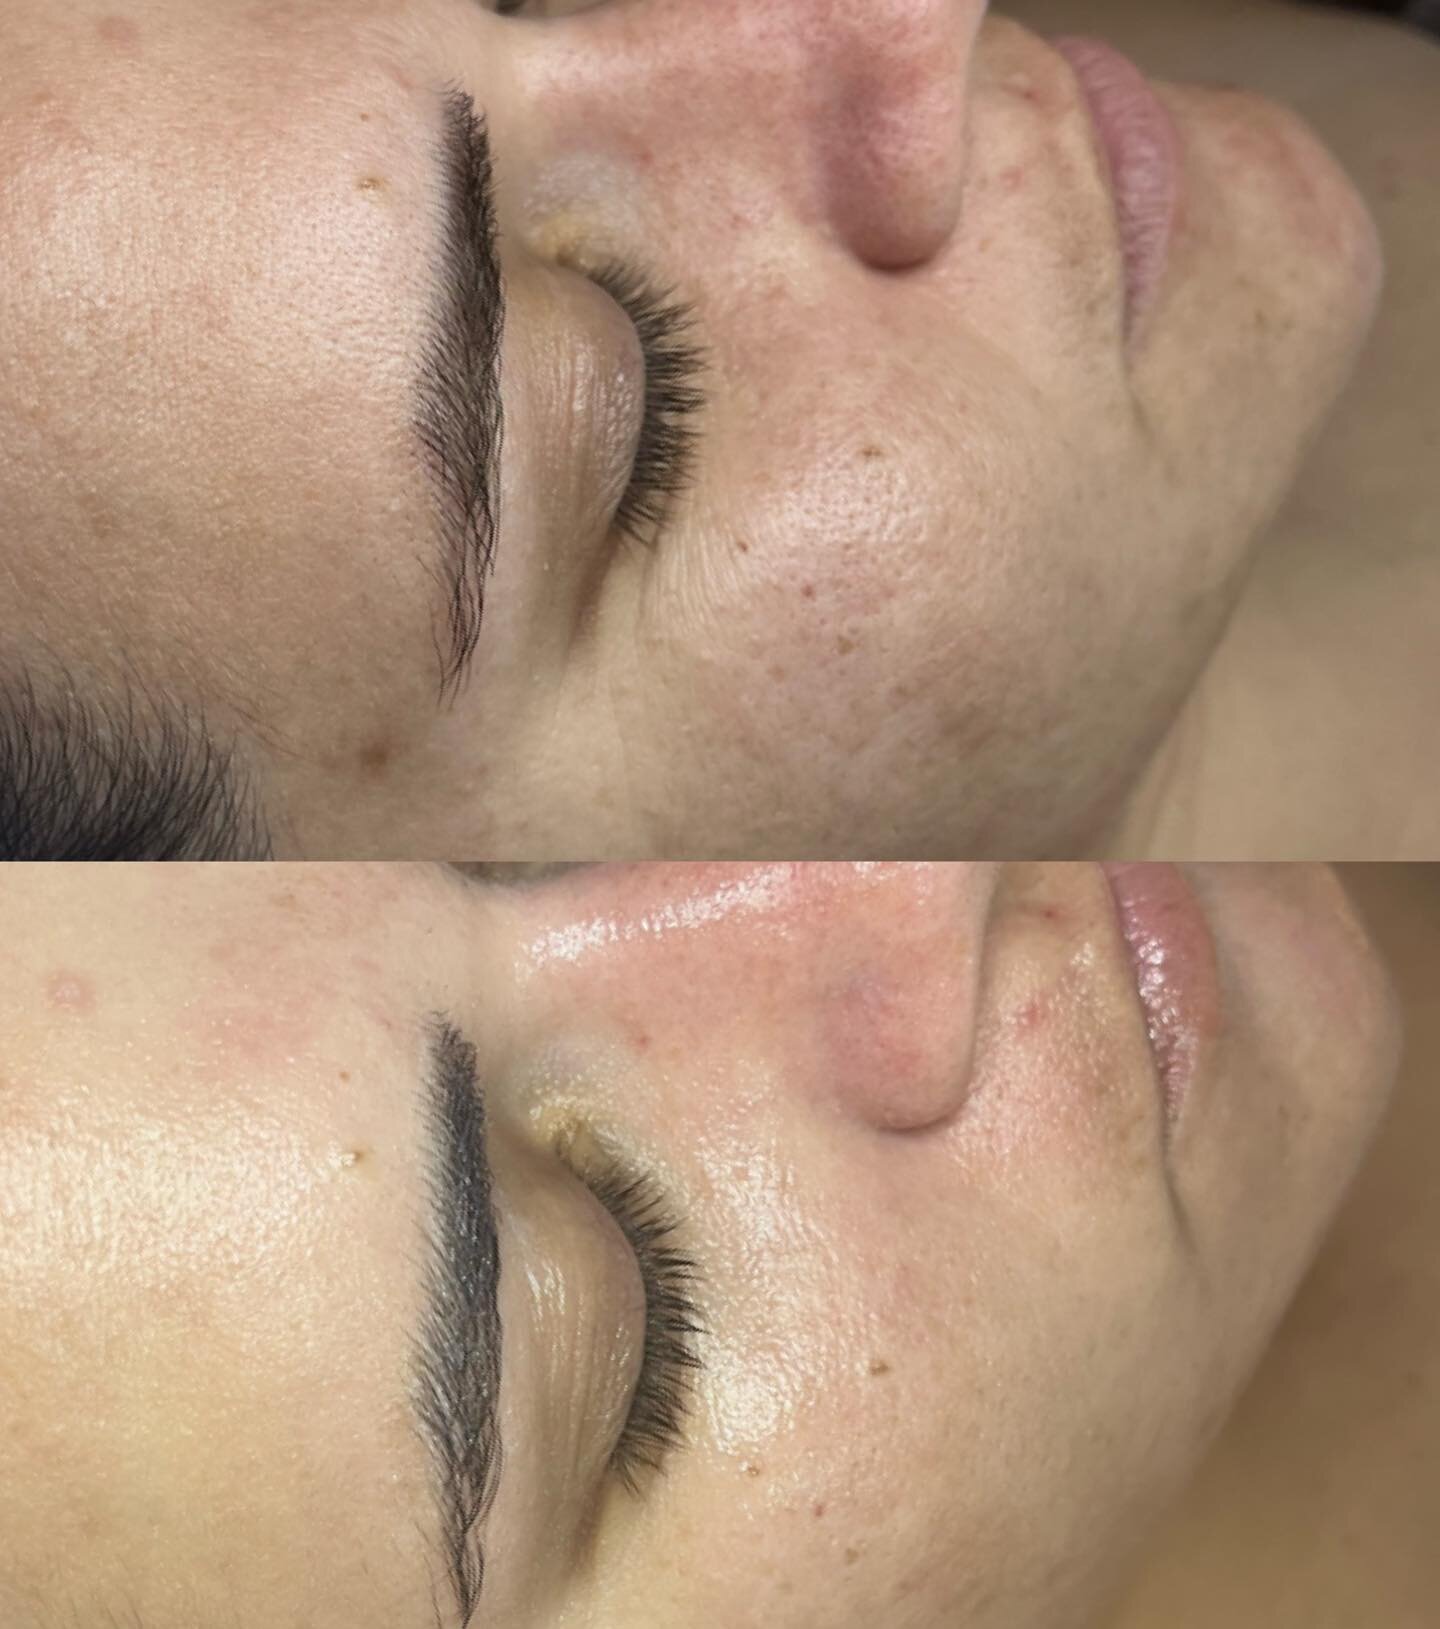 #hydrafacials are clinically-proven to improve skin concerns and give an instant glow. ✨ 

All clients receive $25 off their first HydraFacial! 🖤

Easy online booking 💻 

926-209-4050 ☎️